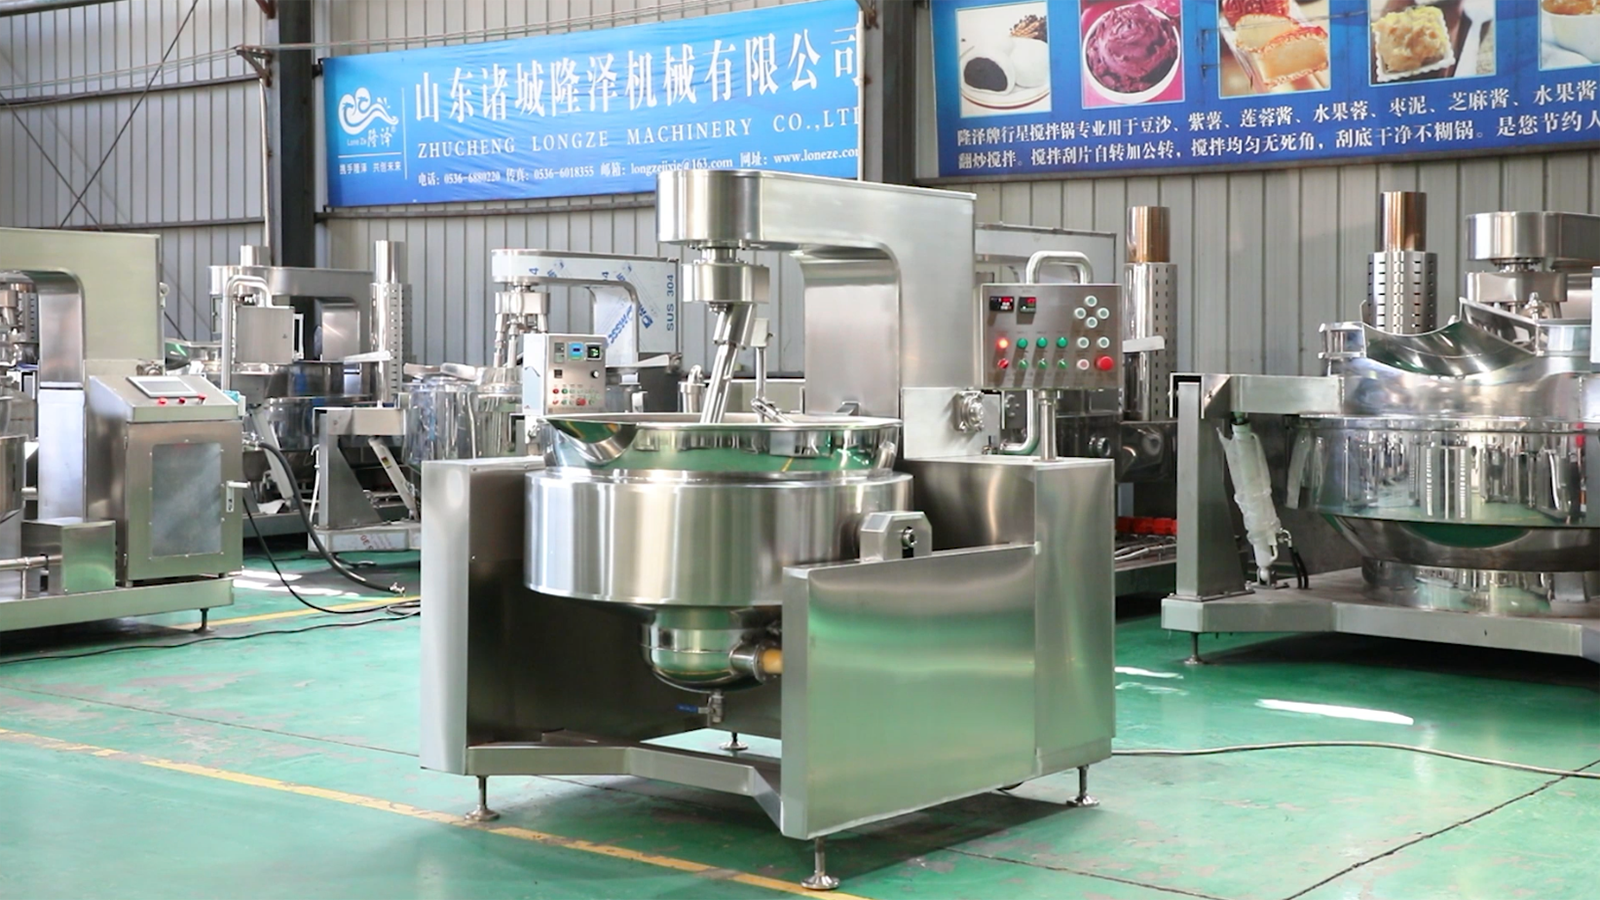 Thermal Oil Cooking Mixer Machine for Paste /Food Fillings